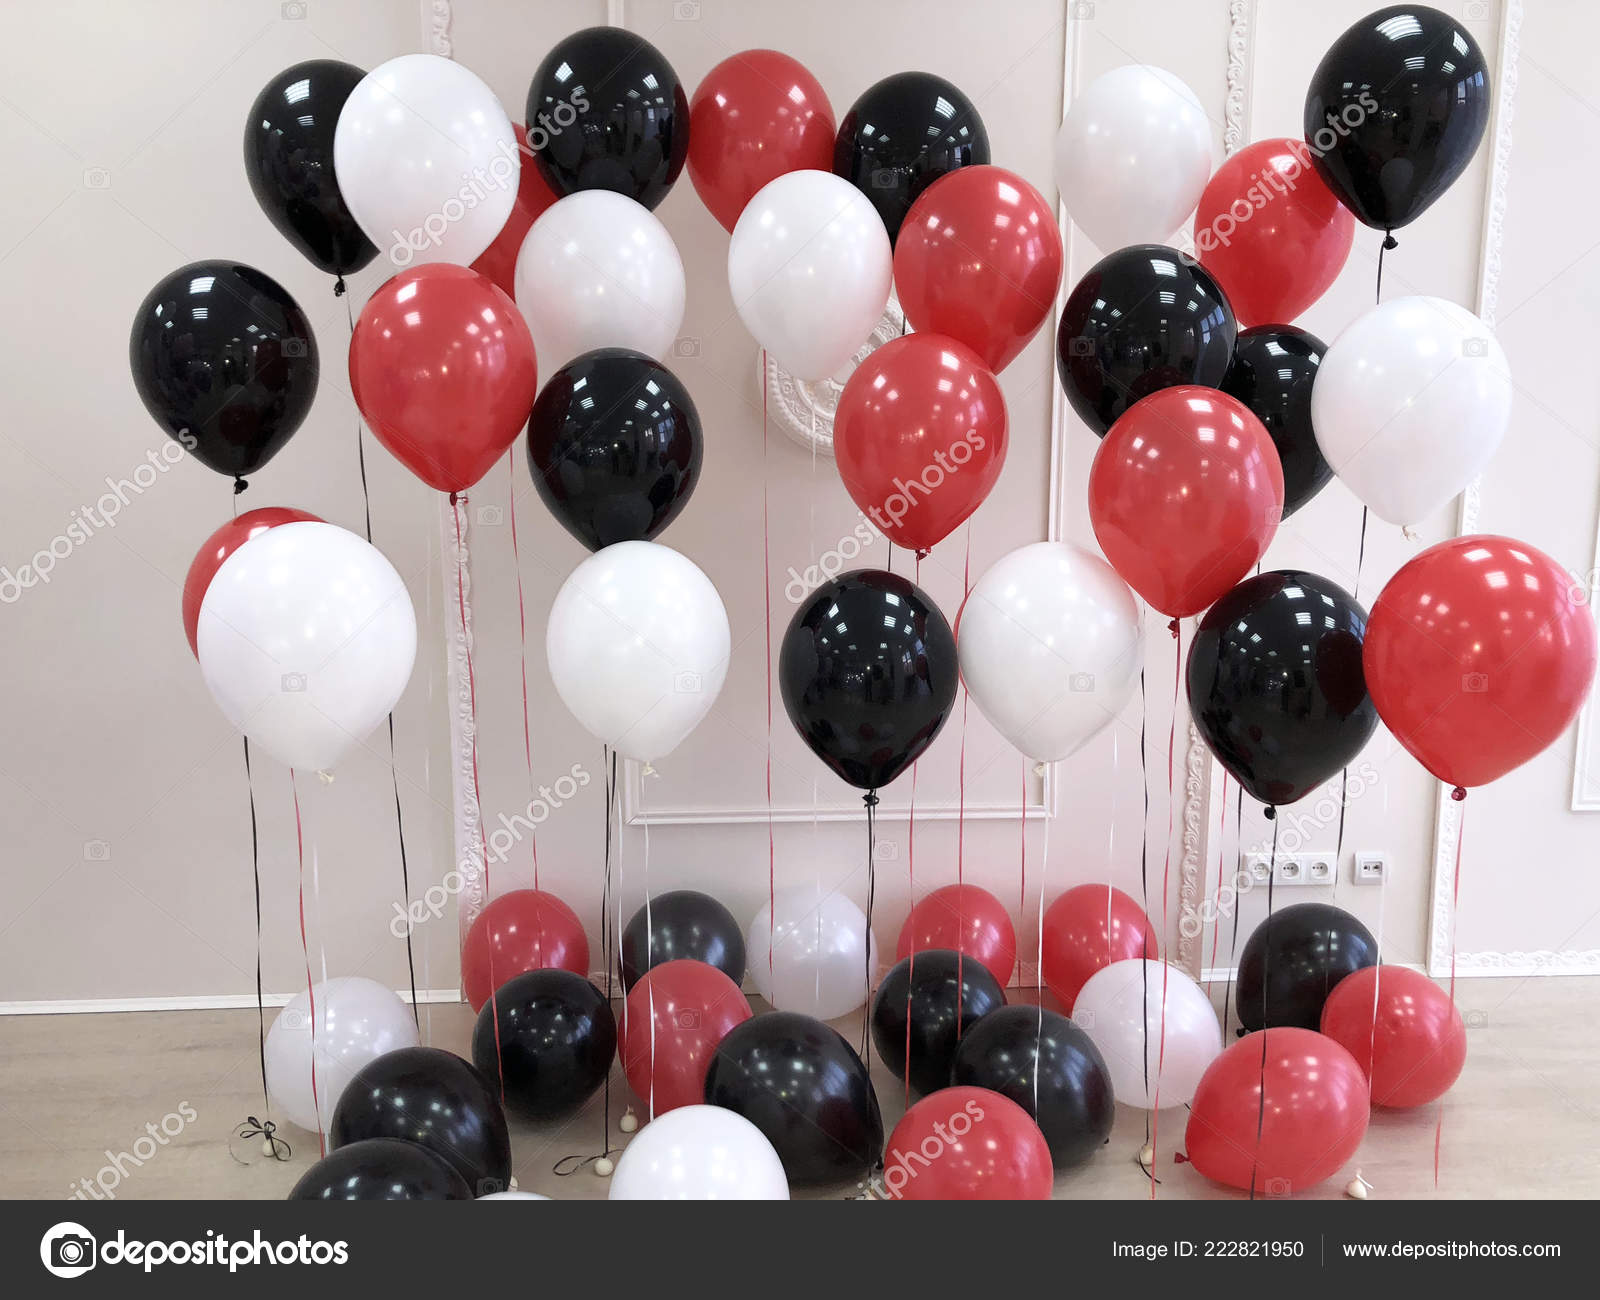 Balloon Red And Black Cheap Online Shopping